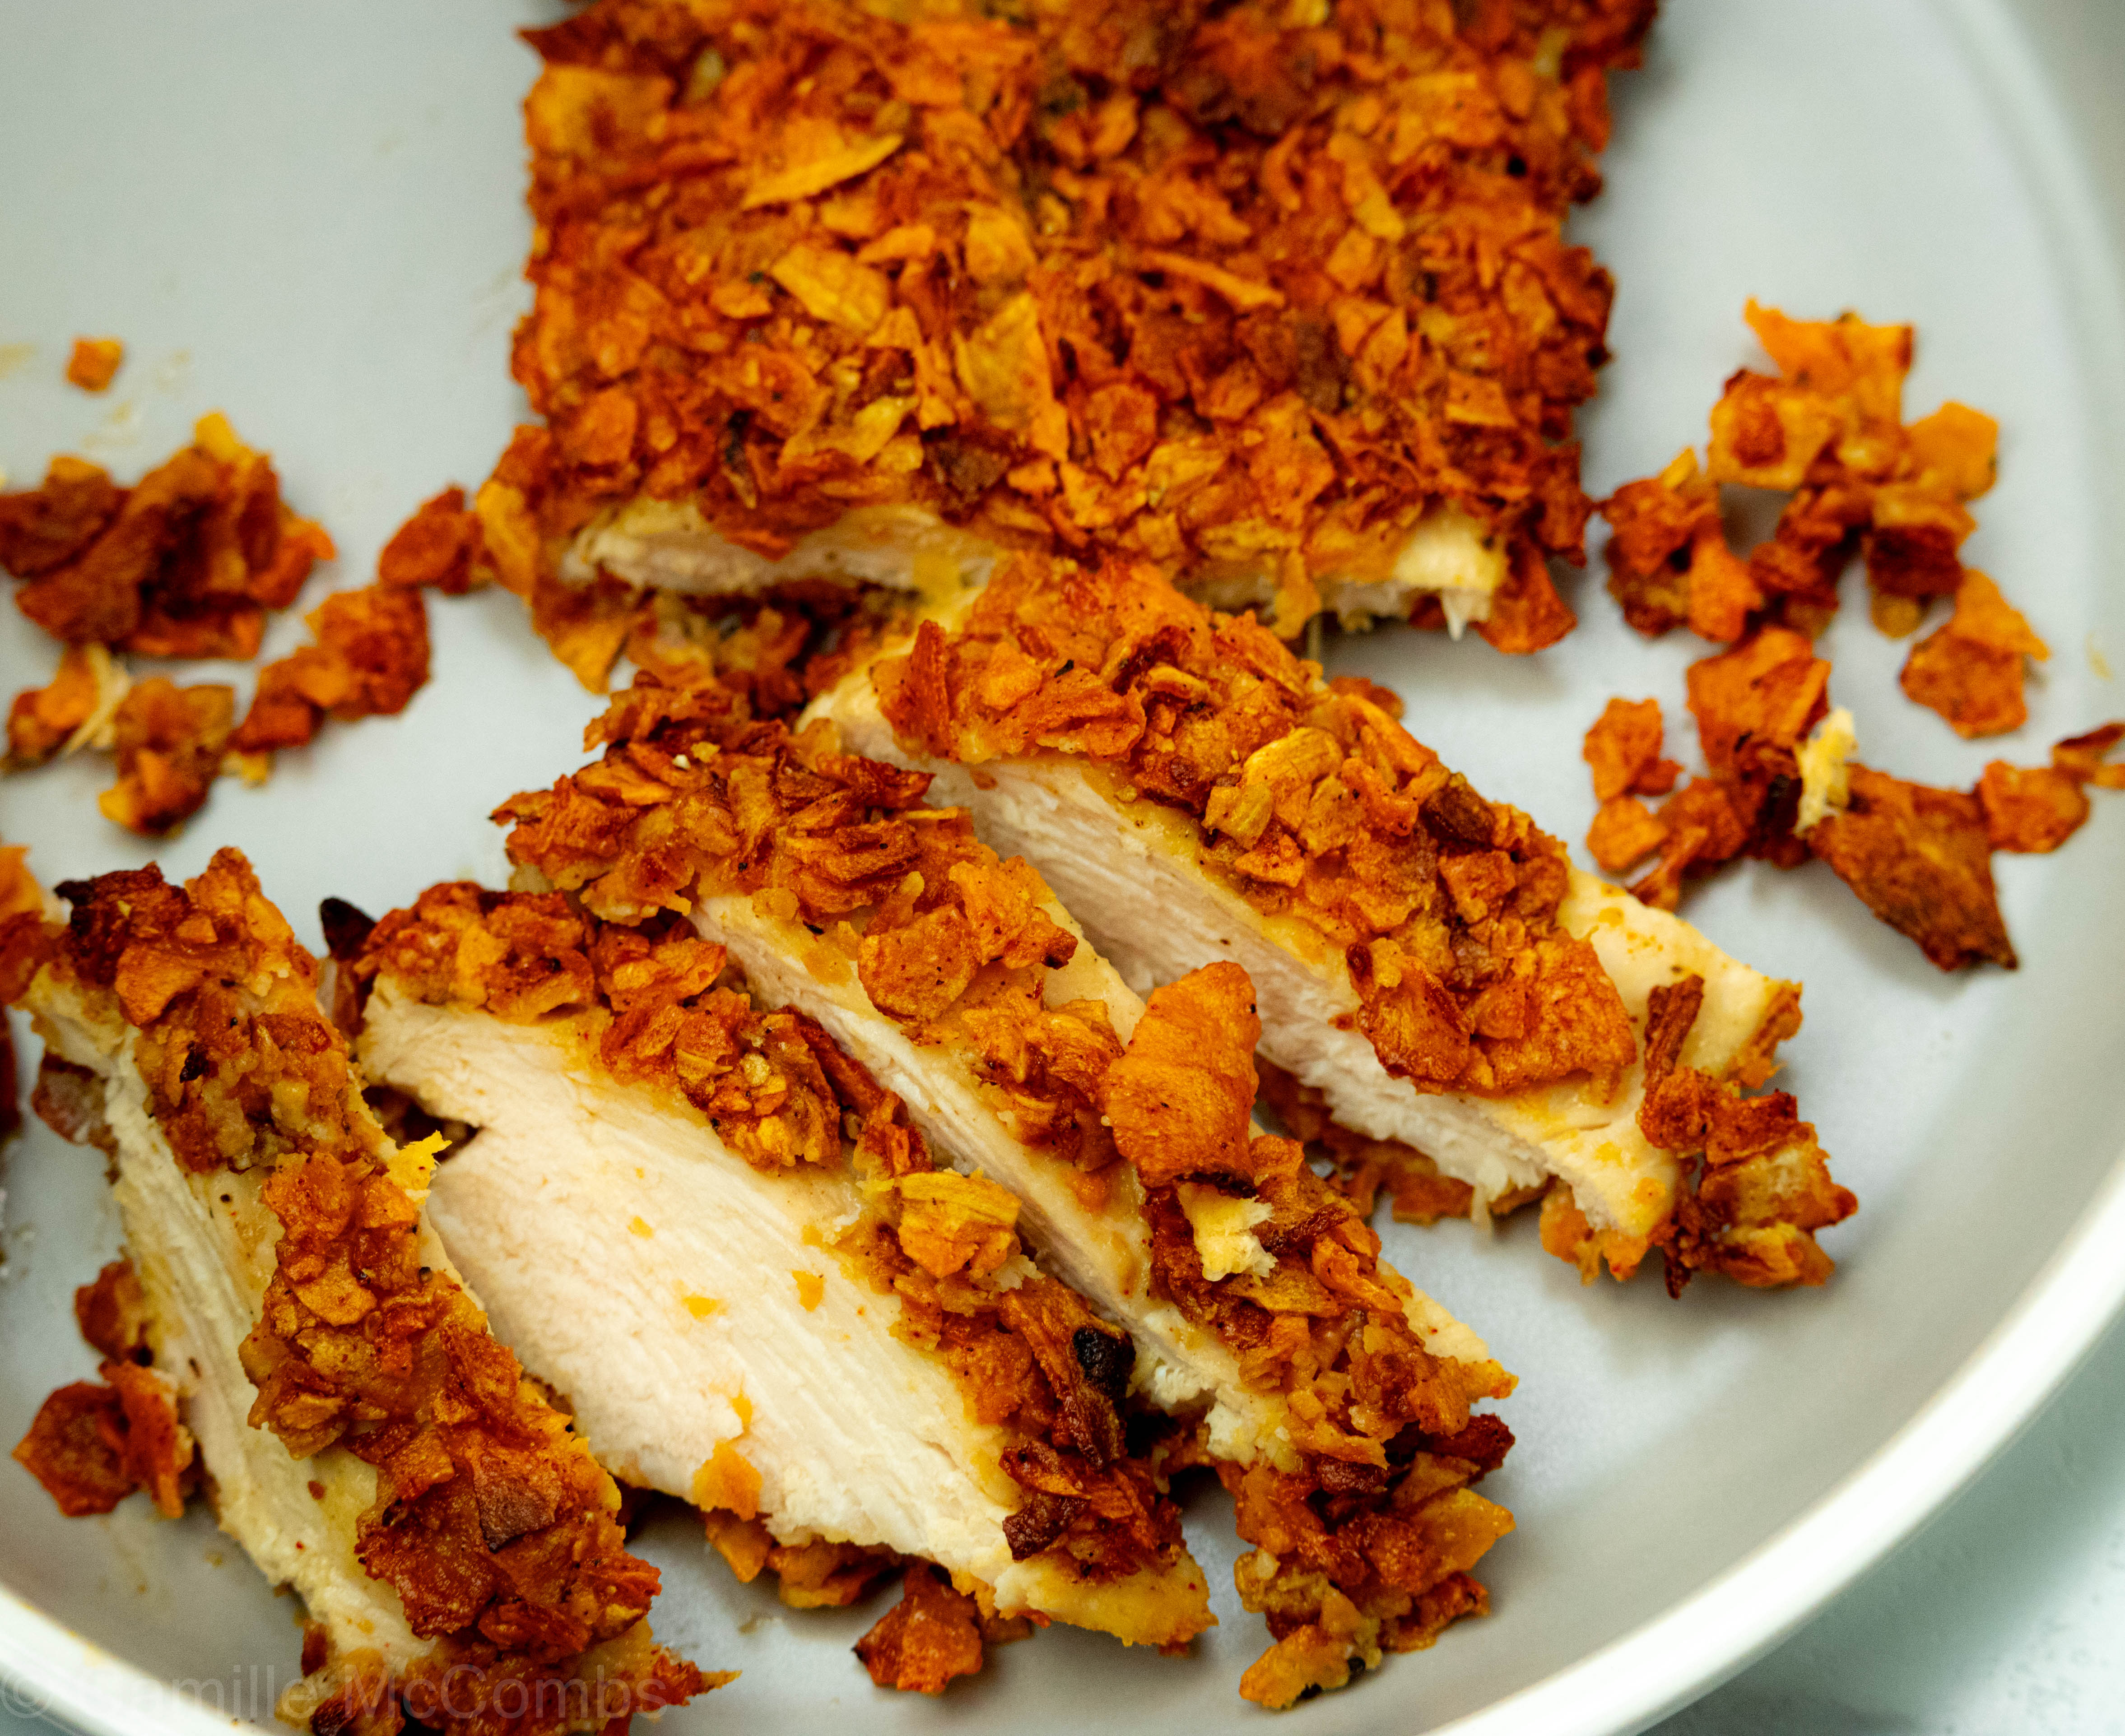 Baked Chicken Breast with Sweet Potato Chip Coating